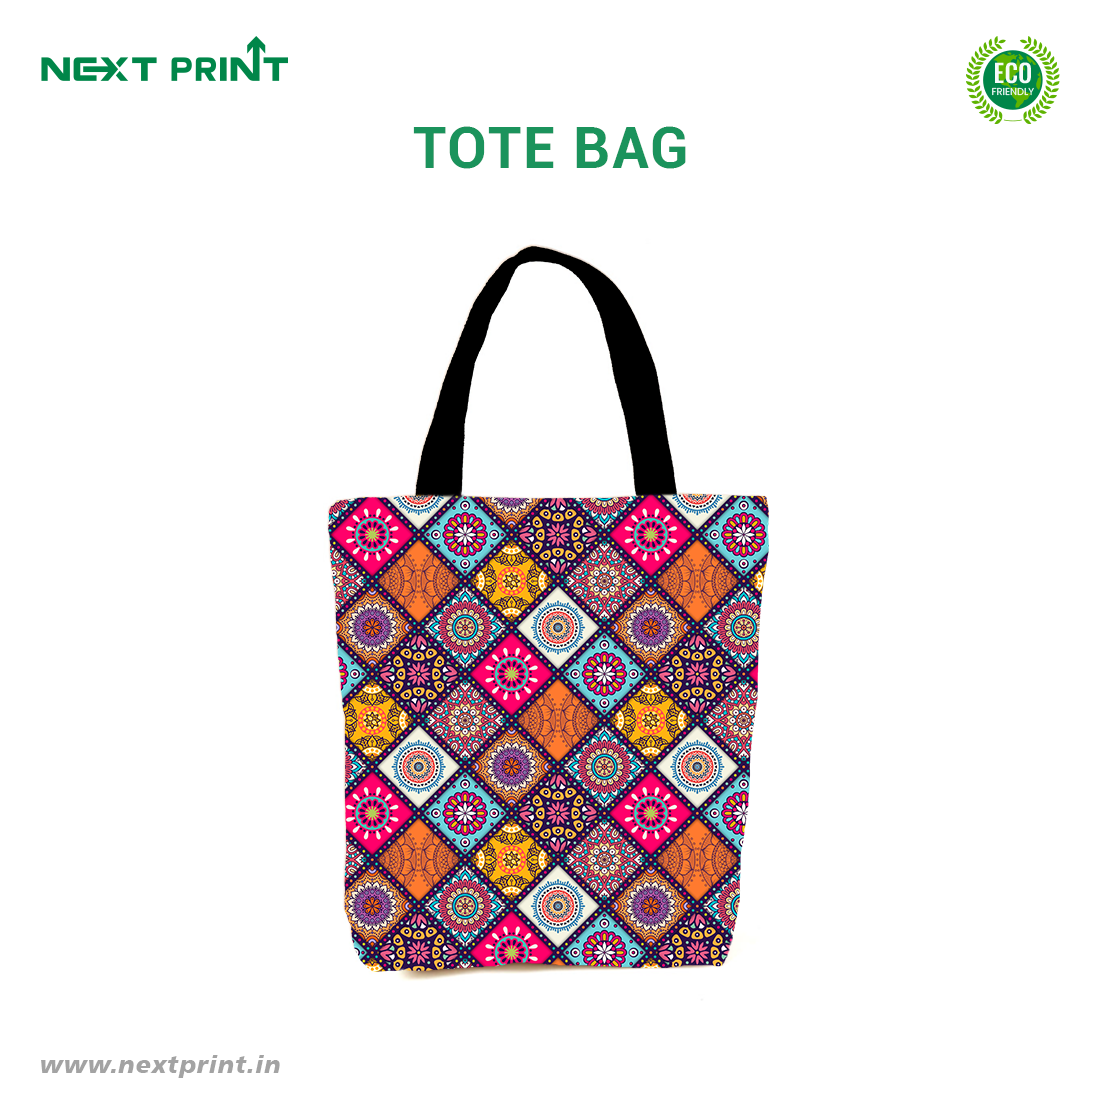 Printed Tote Bag Size 13 x 16 Inches